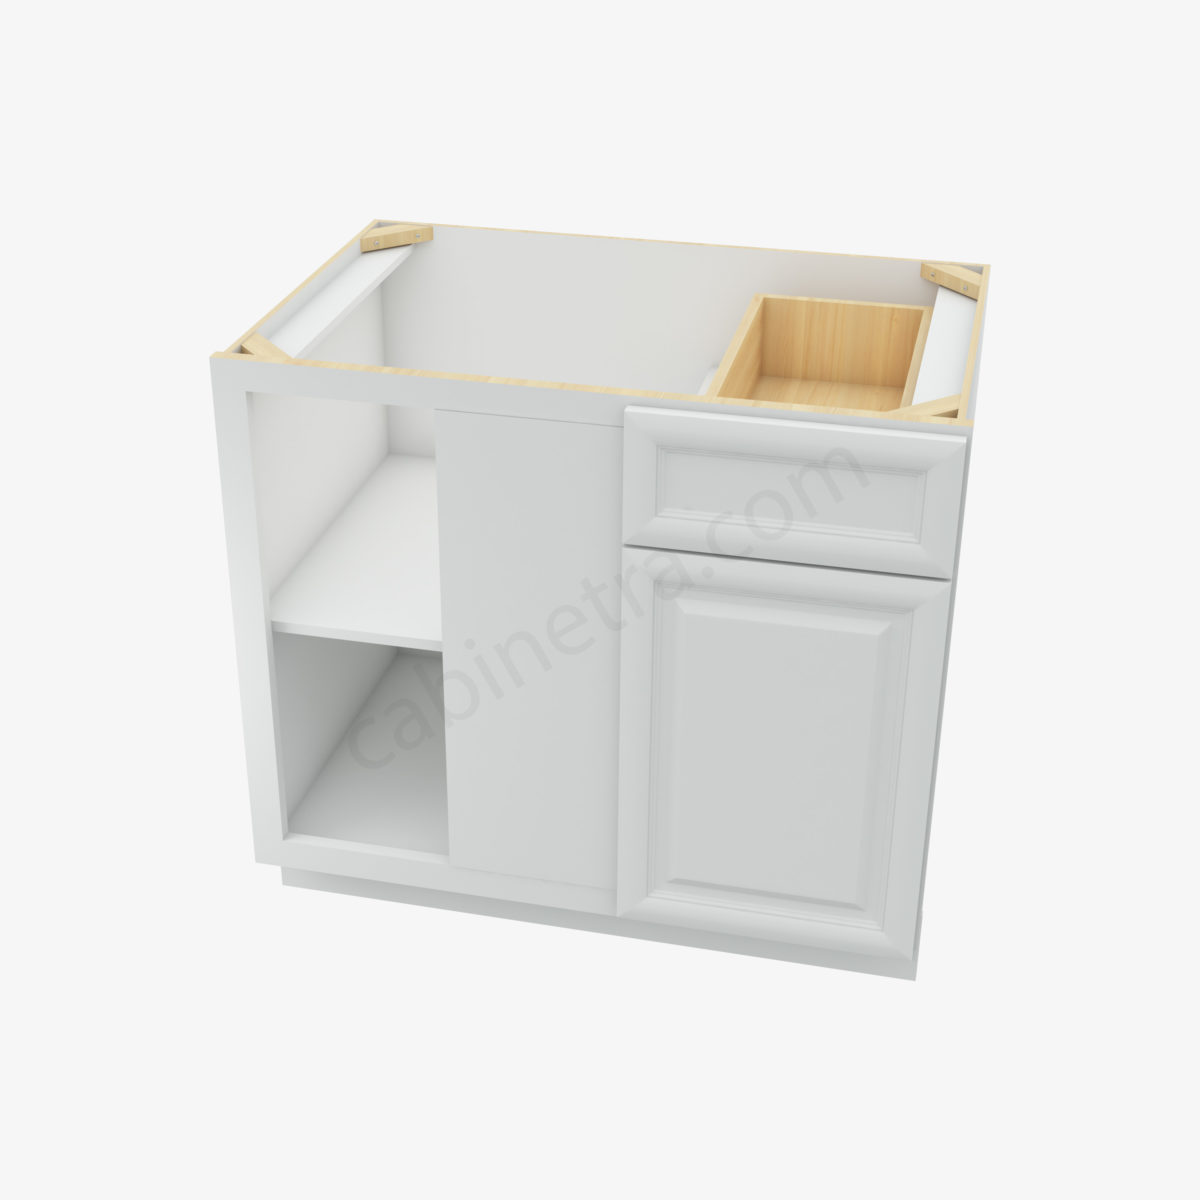 KW BBLC39 42 36W 3  Forevermark K White Cabinetra scaled